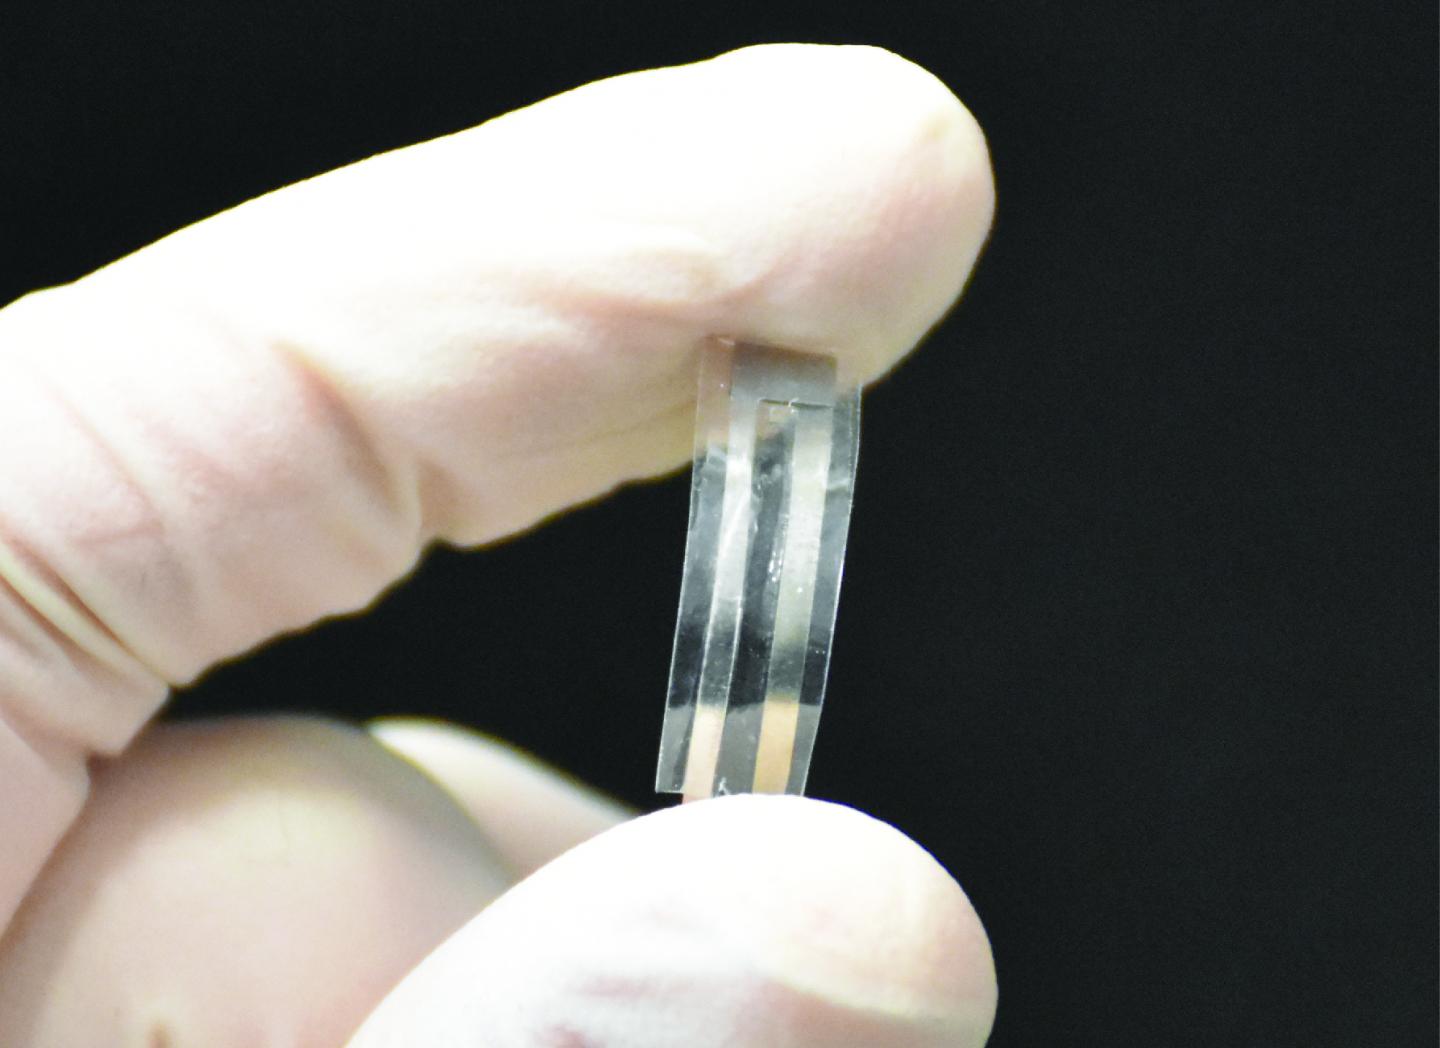 This biodegradable piezoelectric pressure sensor developed by the University of Connecticut's Nguyen Research Group could be used by doctors to monitor chronic lung disease, brain swelling and other medical conditions before it dissolves safely in a patient's body. (Source: Thanh Duc Nguyen)